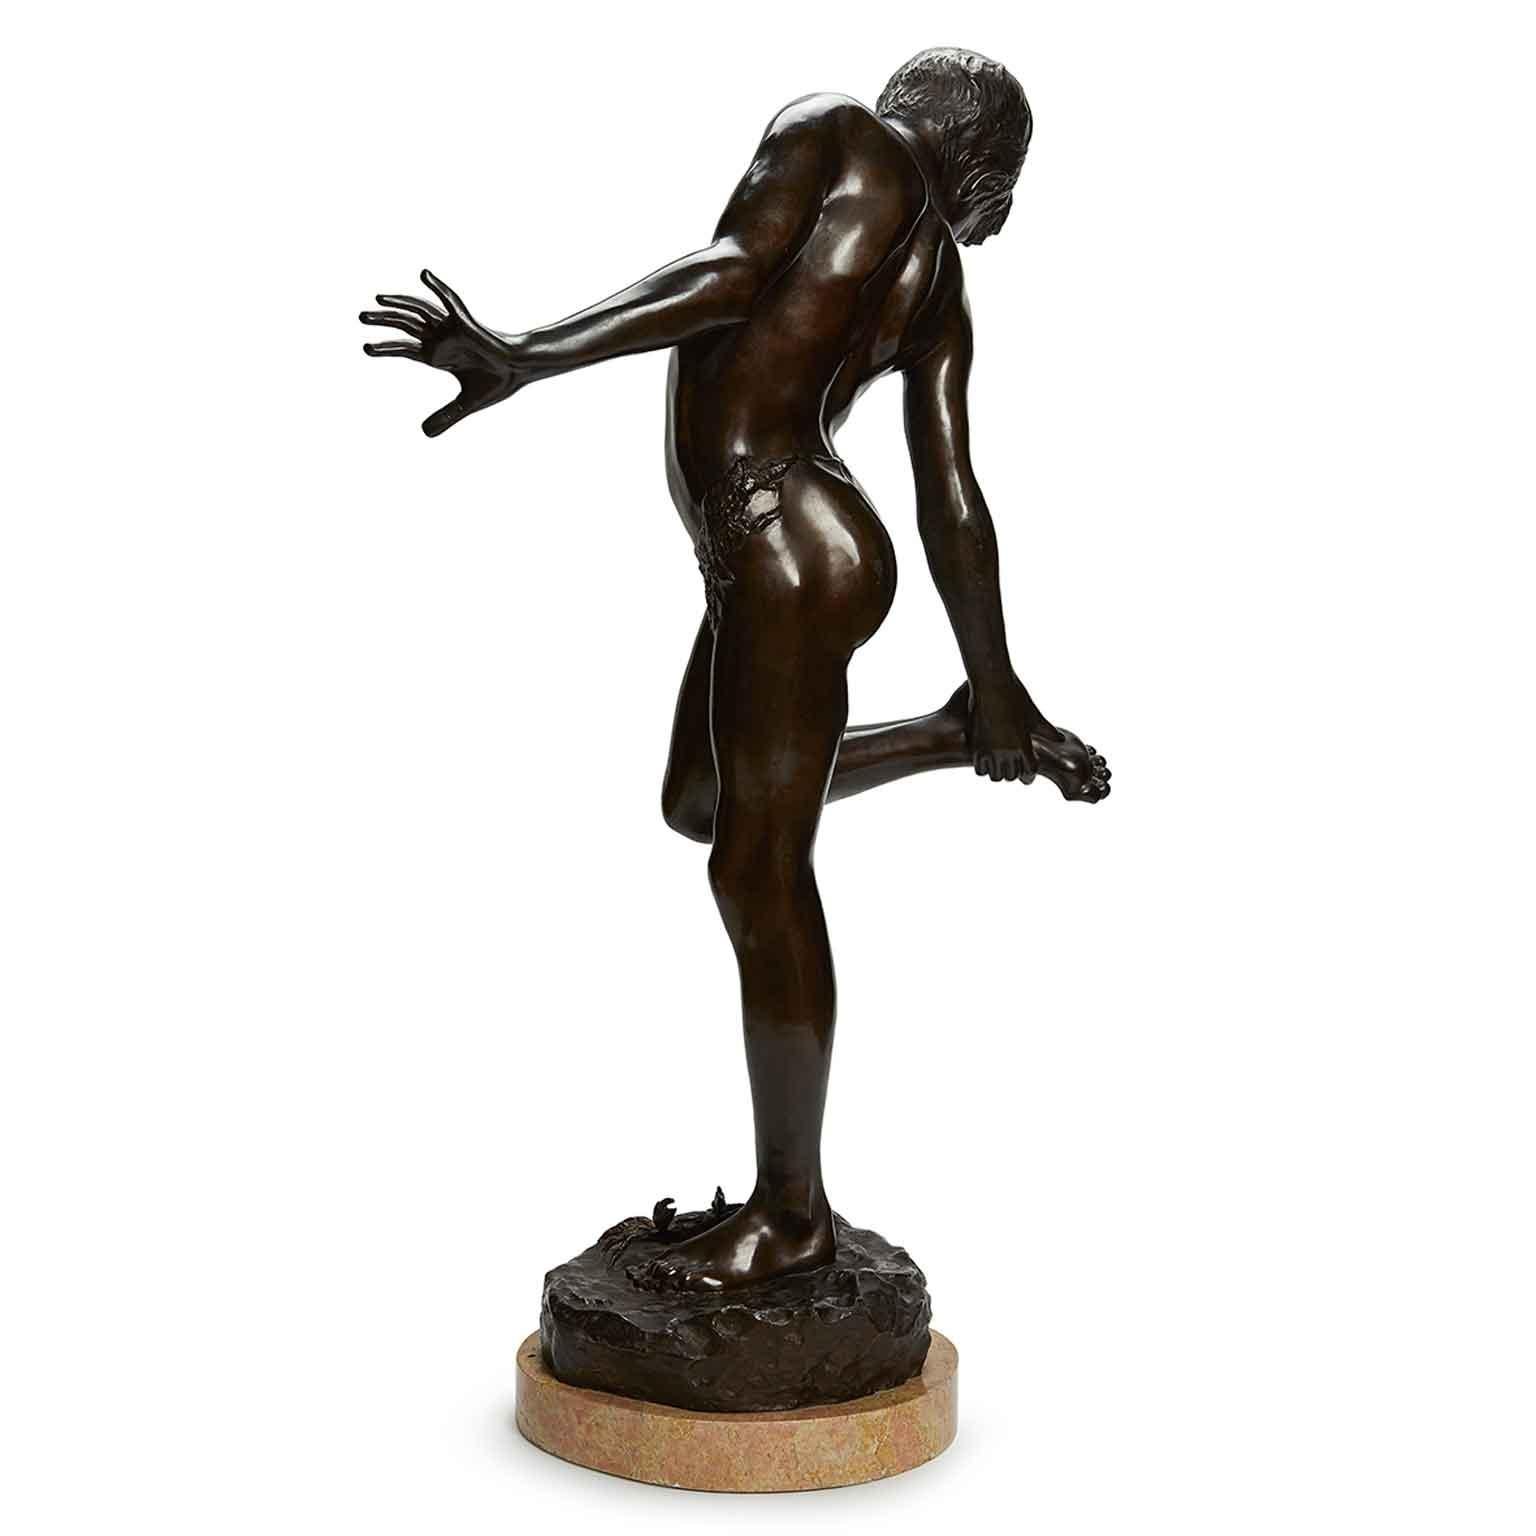 Annibale De Lotto Italian bronze fisher boy Sculpture featuring a semi nude young boy figure, a standing fisher boy getting bit by a crab on his foot holding up his right leg, observing the crab bite. 
Realized in the early 20th century, thisl large